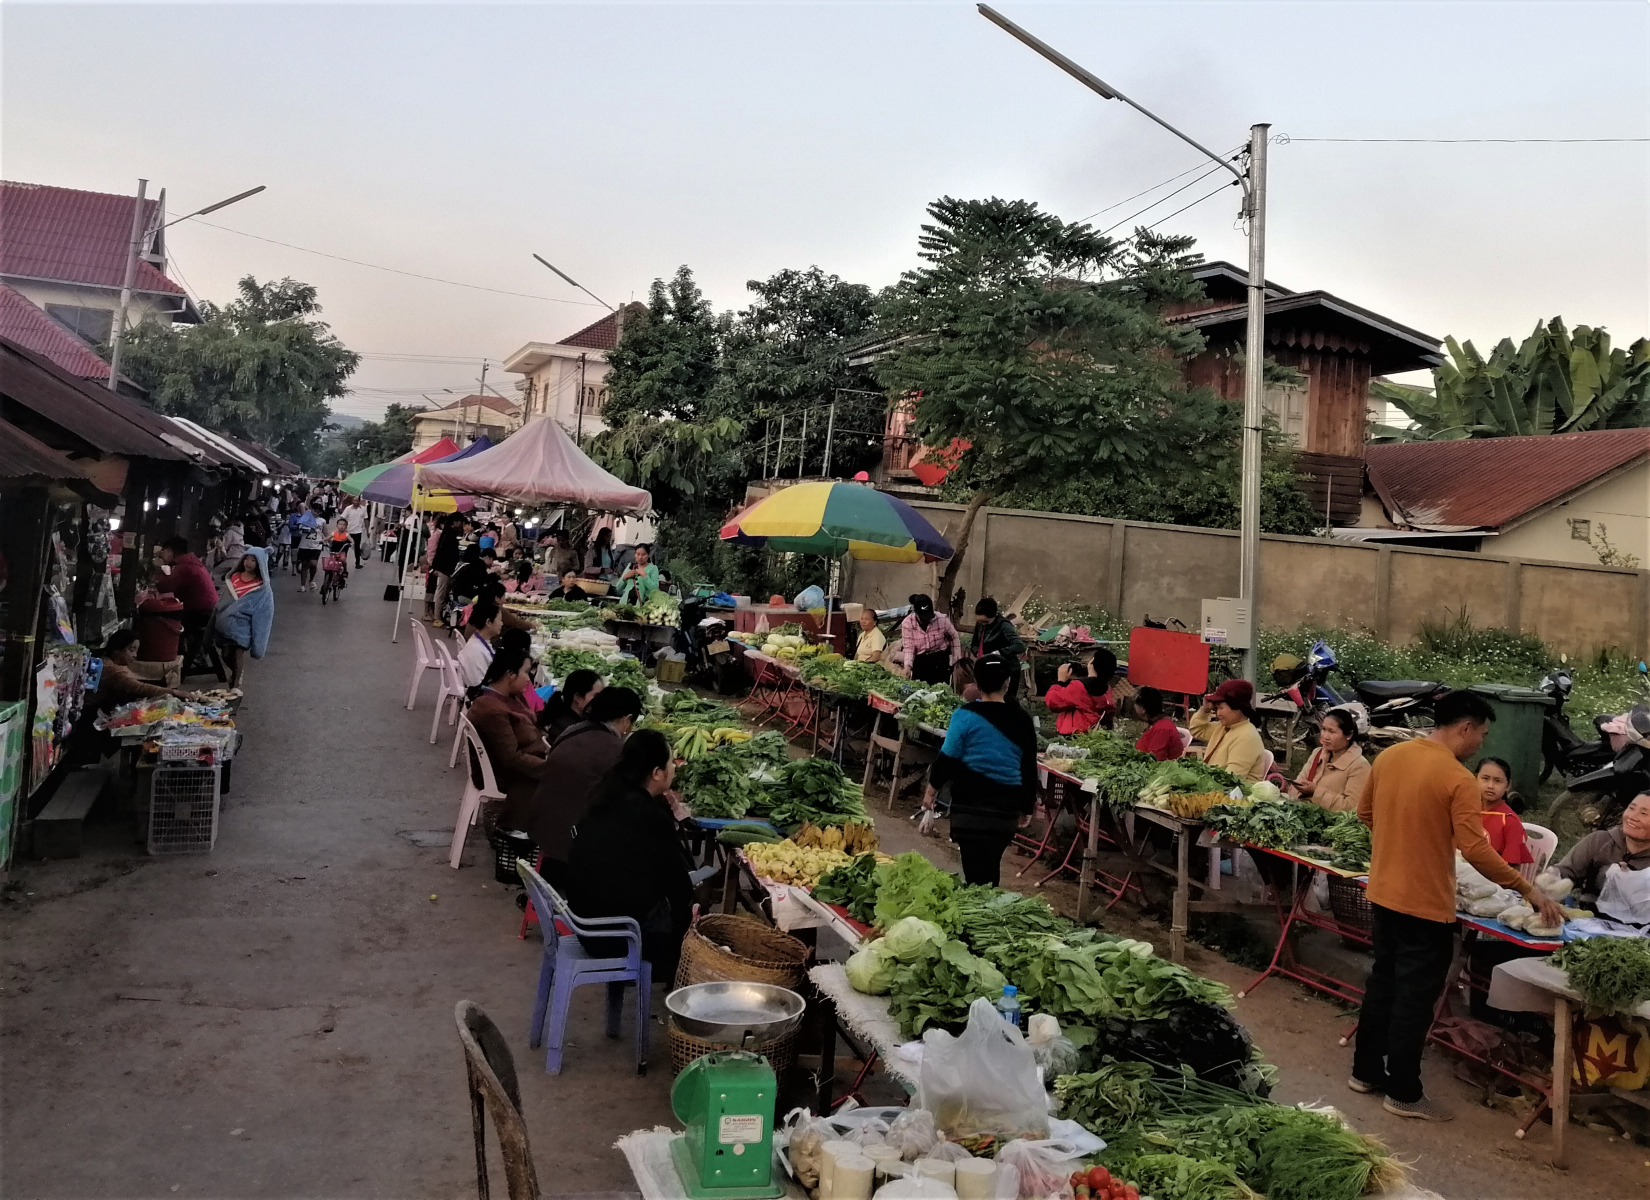 At the small night market in Luang Namtha, Laos - How to Haggle in Developing Countries